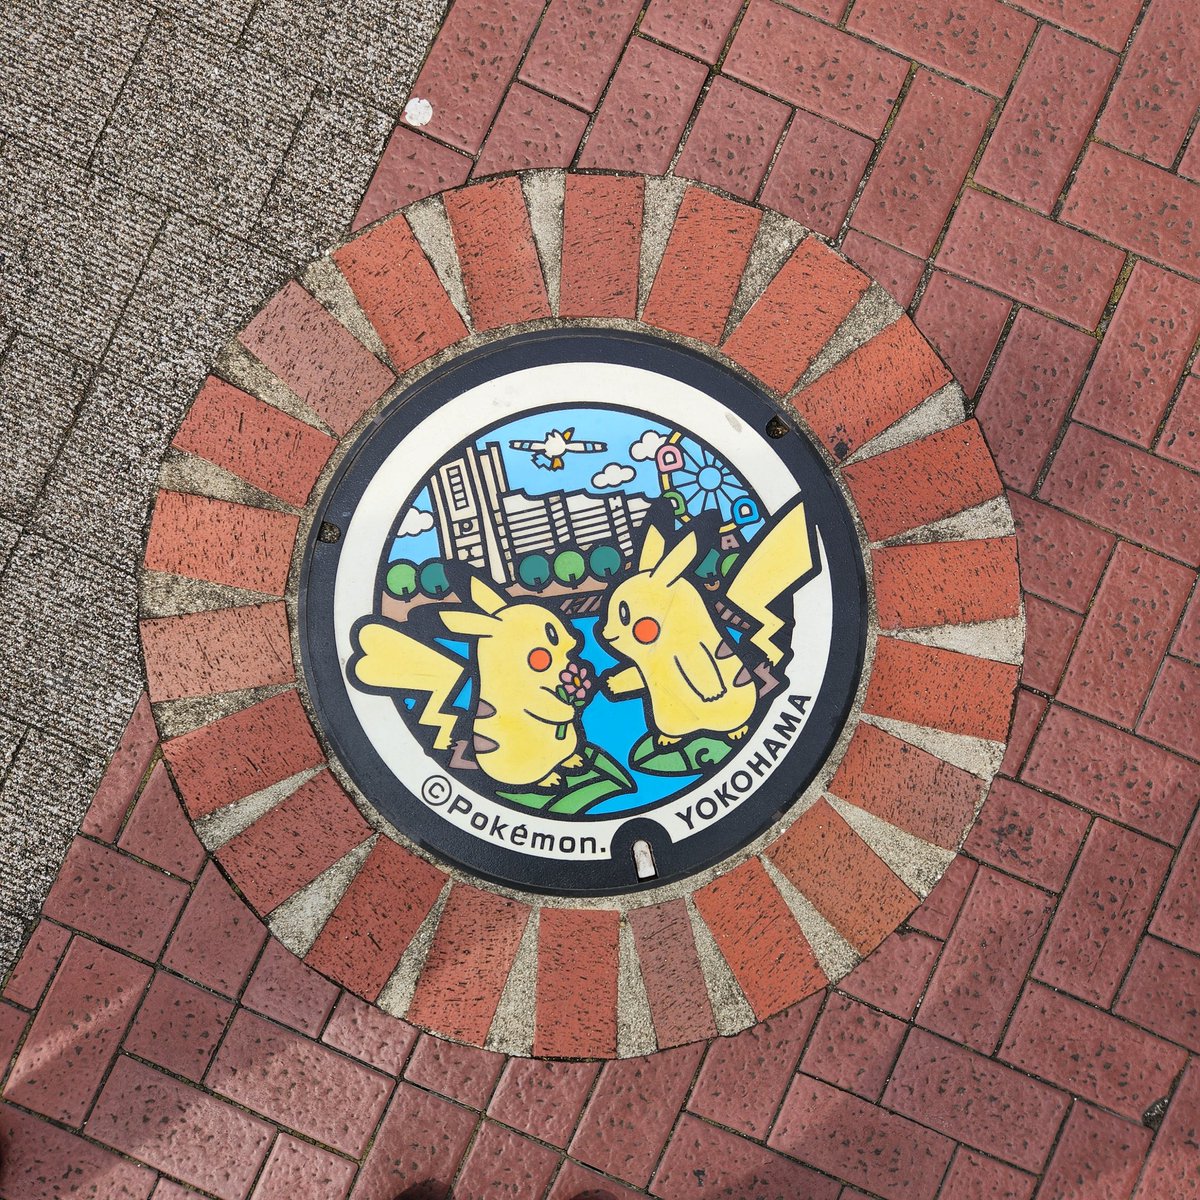 I wanna go and see the jirachi and eevee manhole covers but it's too far